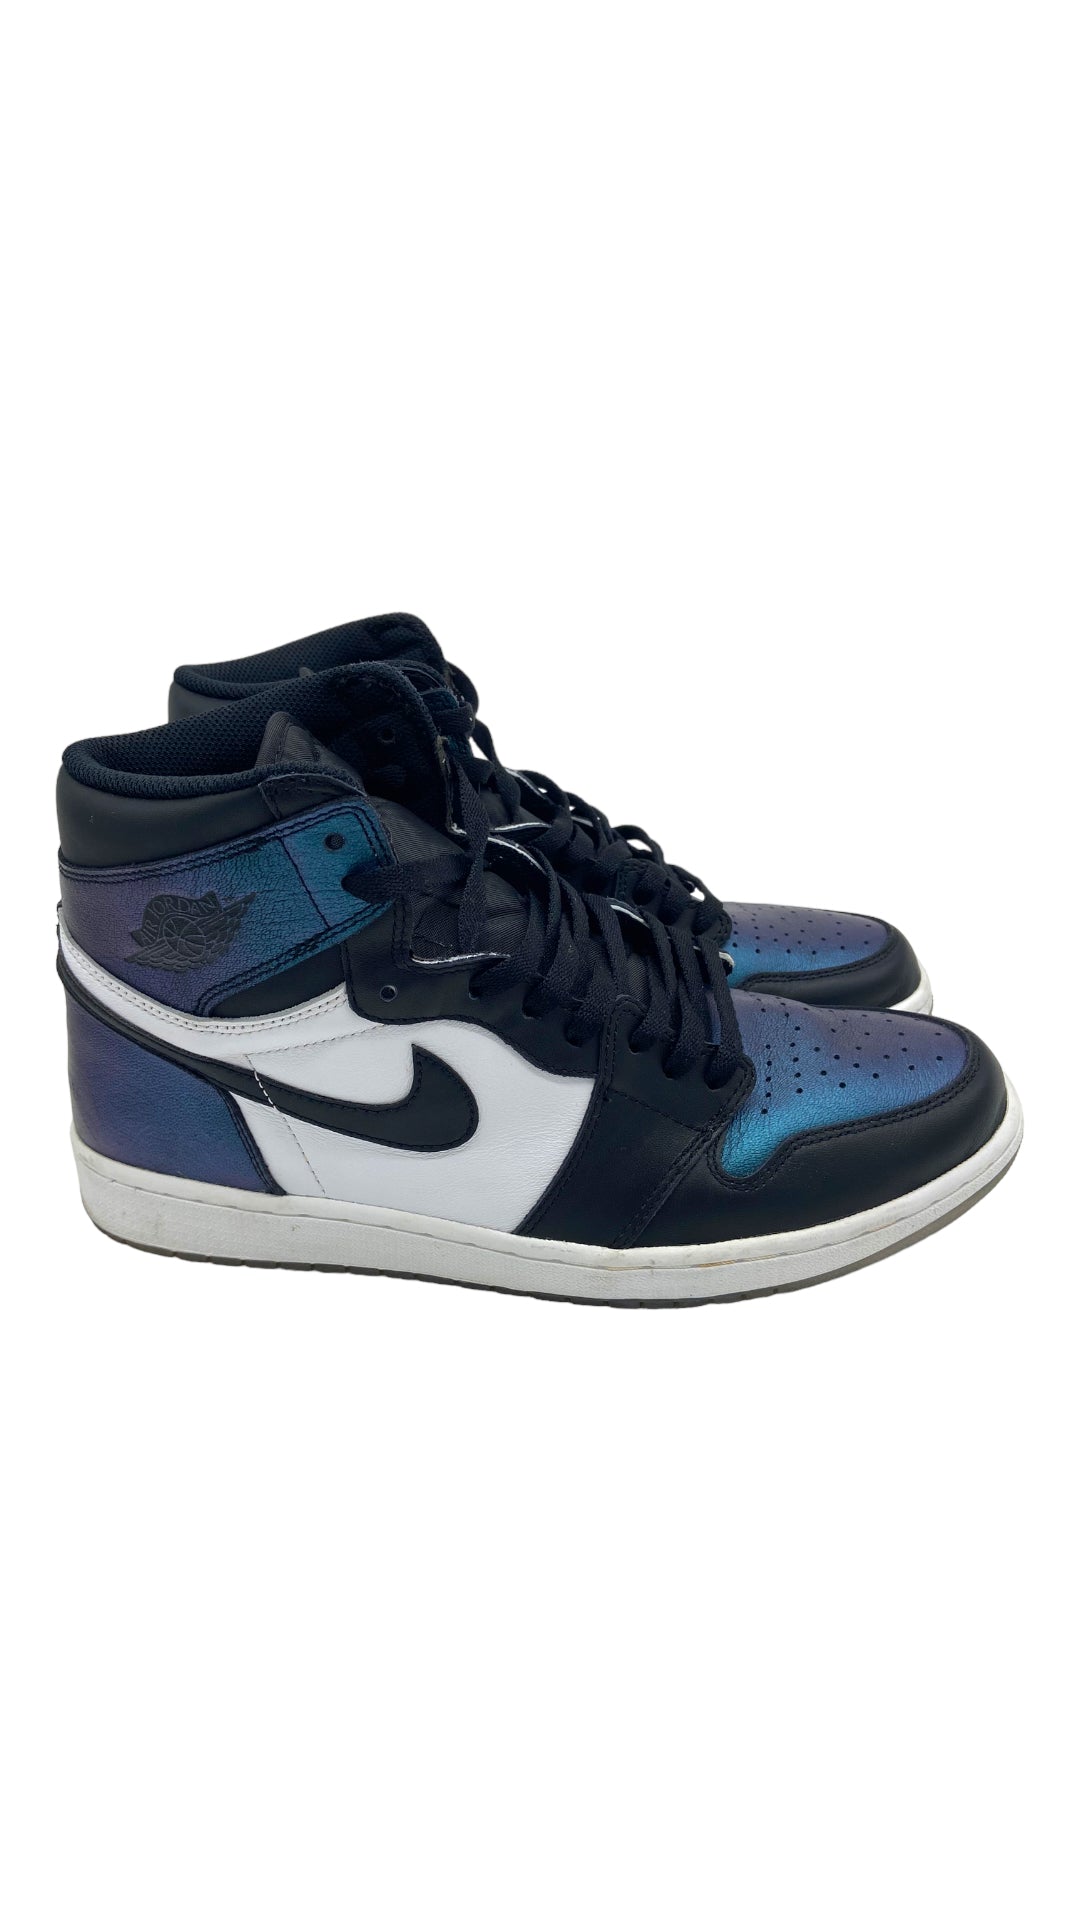 Load image into Gallery viewer, Preowned Jordan 1 Retro All-Star Chameleon (2017) Sz 12
